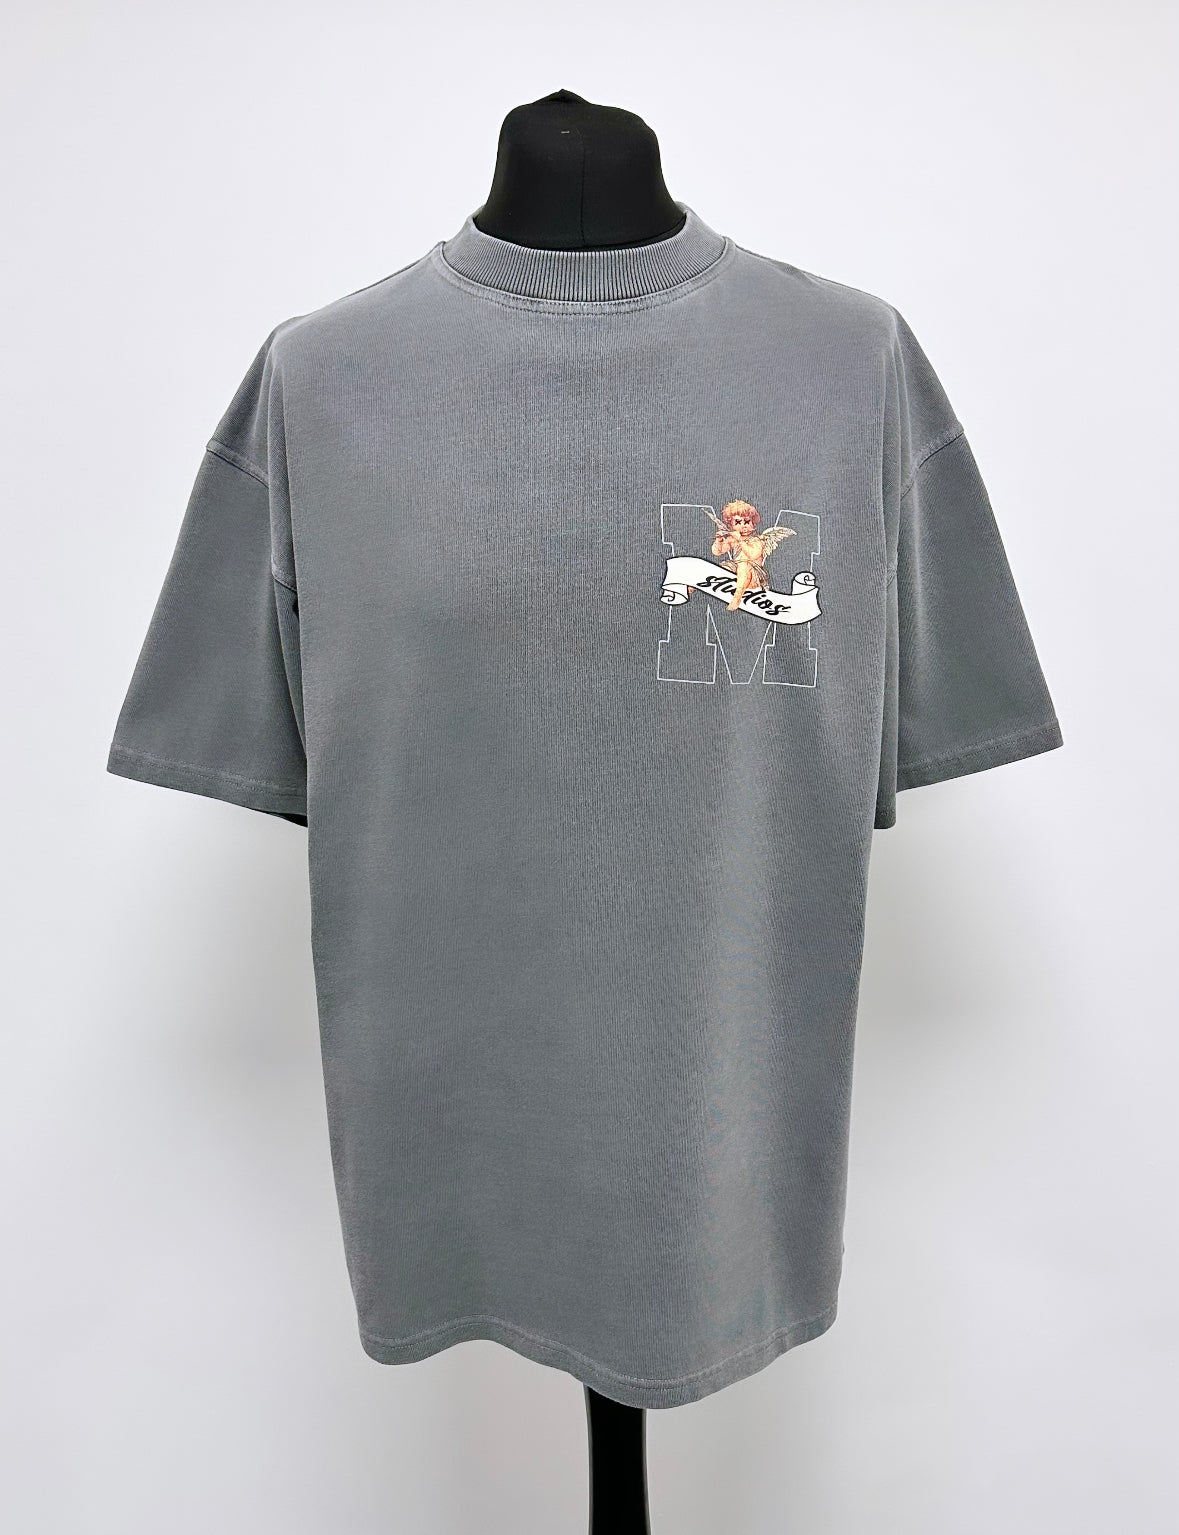 Washed Charcoal Heavyweight Graphic T-shirt.